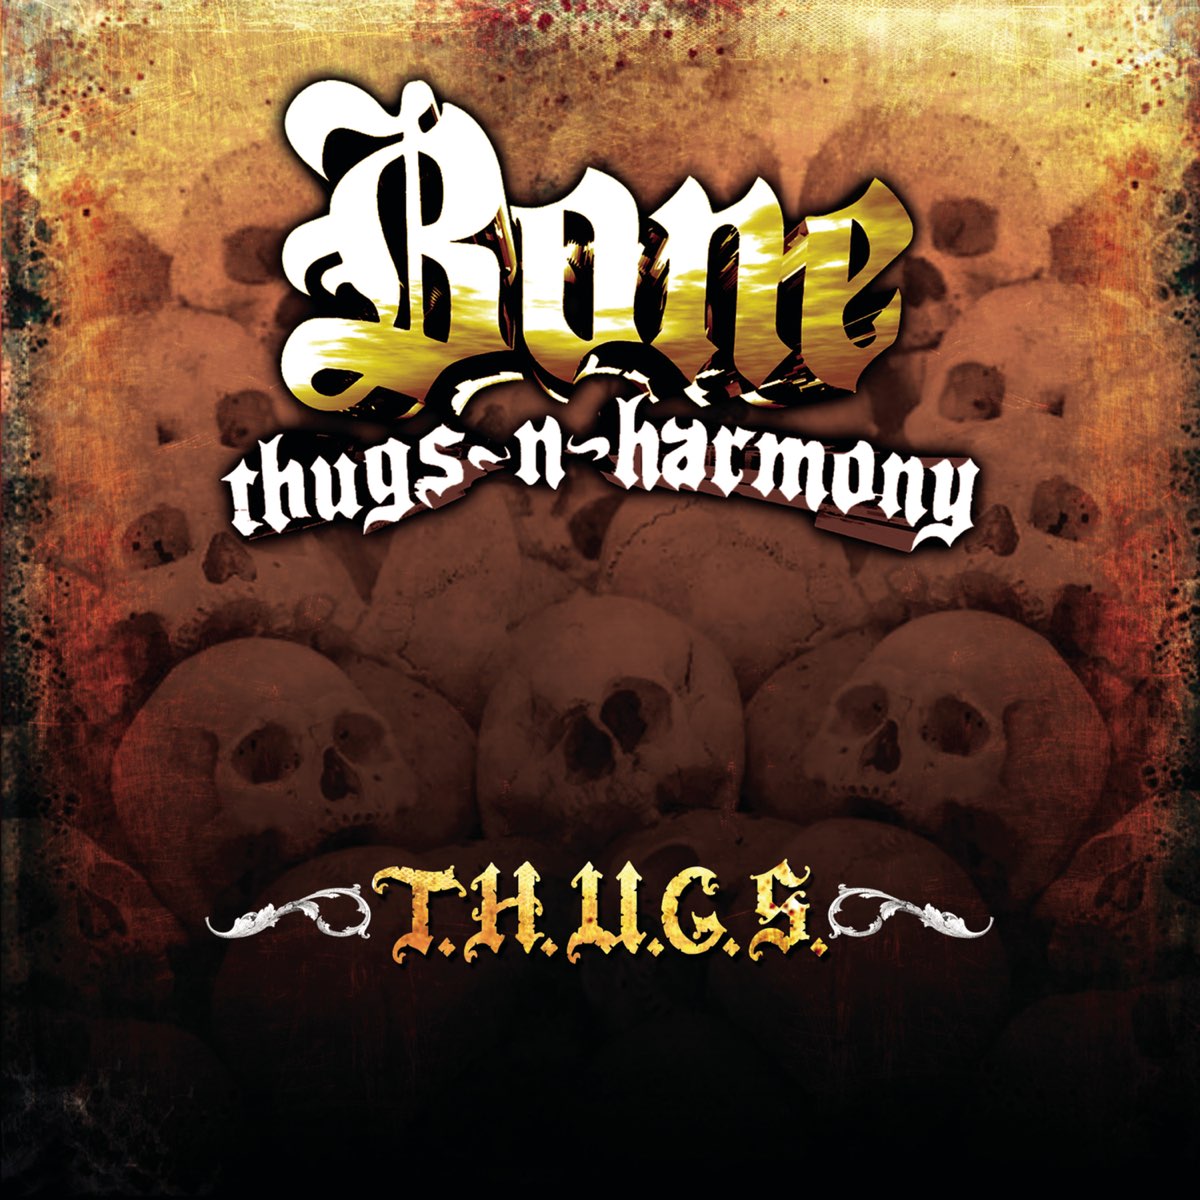 Bone thugs harmony. Bone Thugs-n-Harmony. Thugs. Bone Thugs -n - Harmony Rapper. Bone Thugs & Harmony strength and Loyalty.